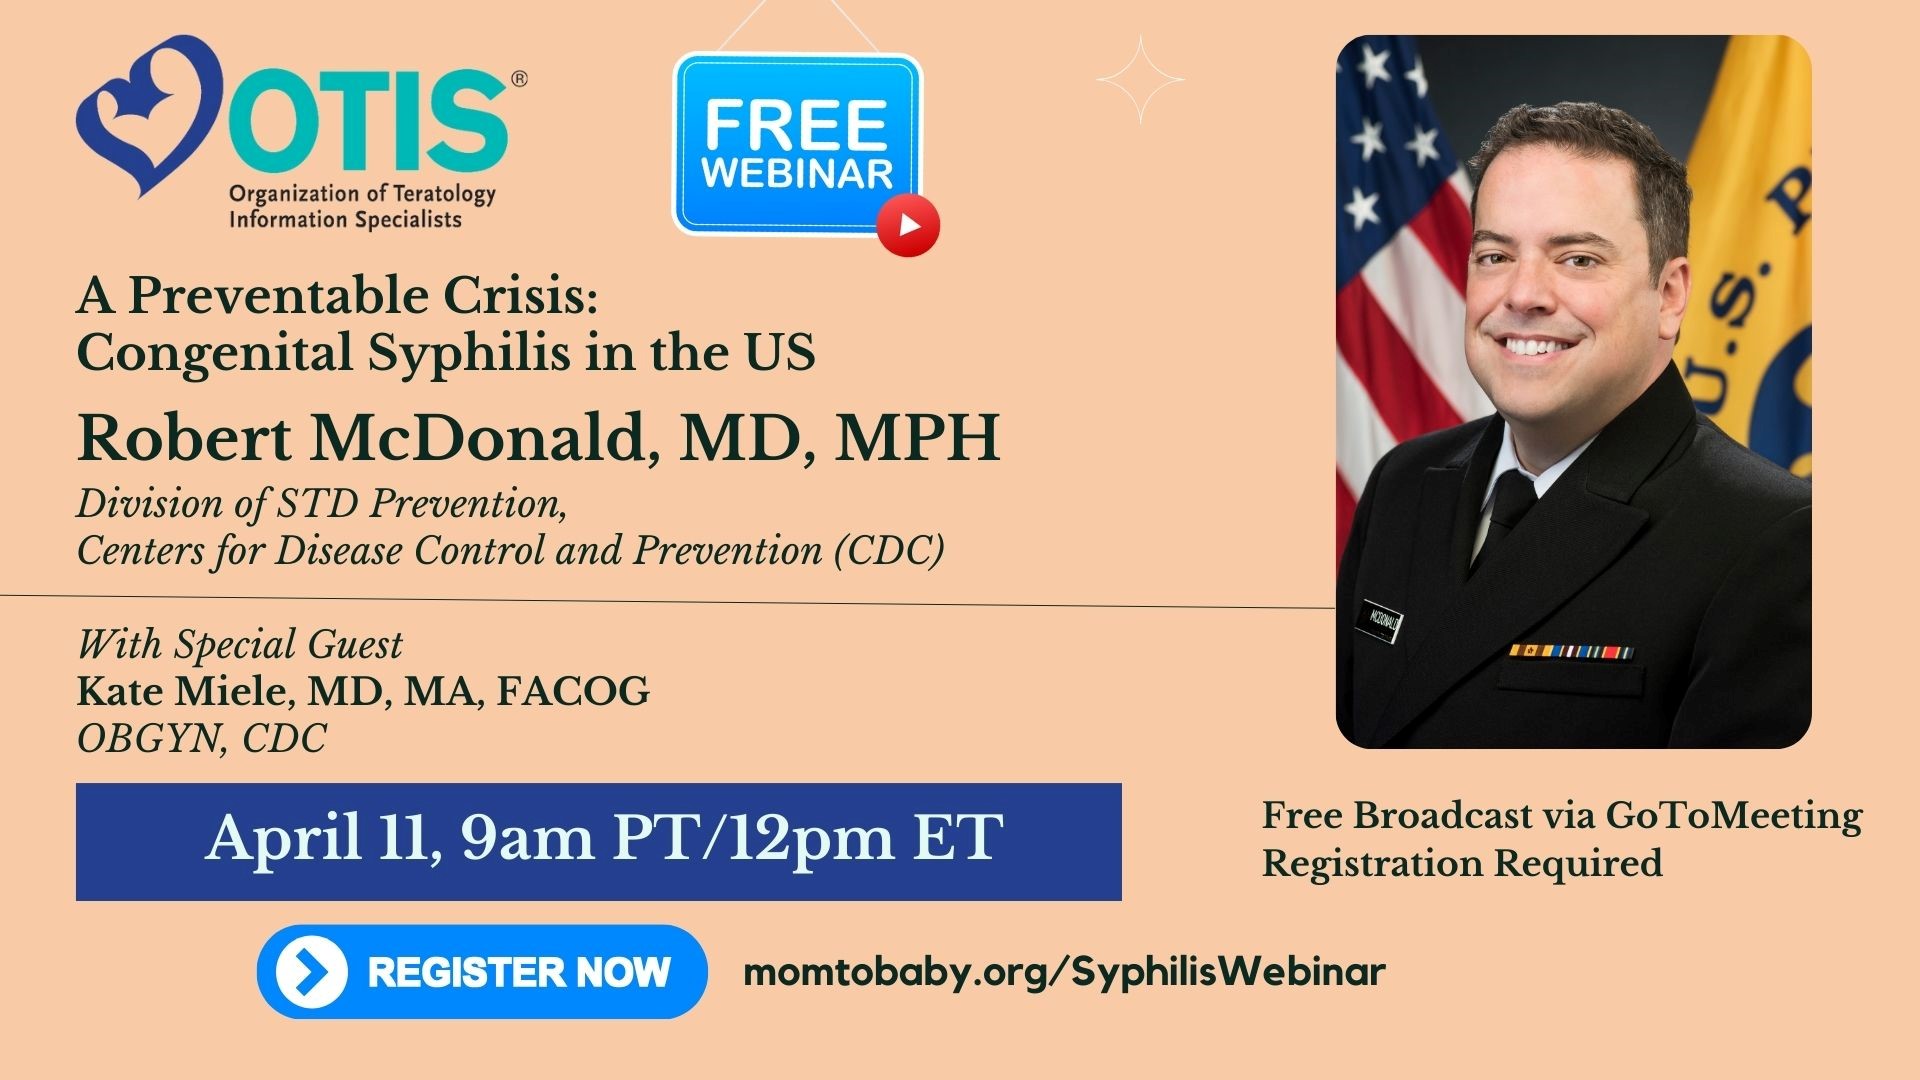 Graphic promoting webinar: "Preventable Crisis: Congenital Syphilis in the U.S." April 11 at 12pm ET. https://momtobaby.org/SyphilisWebinar